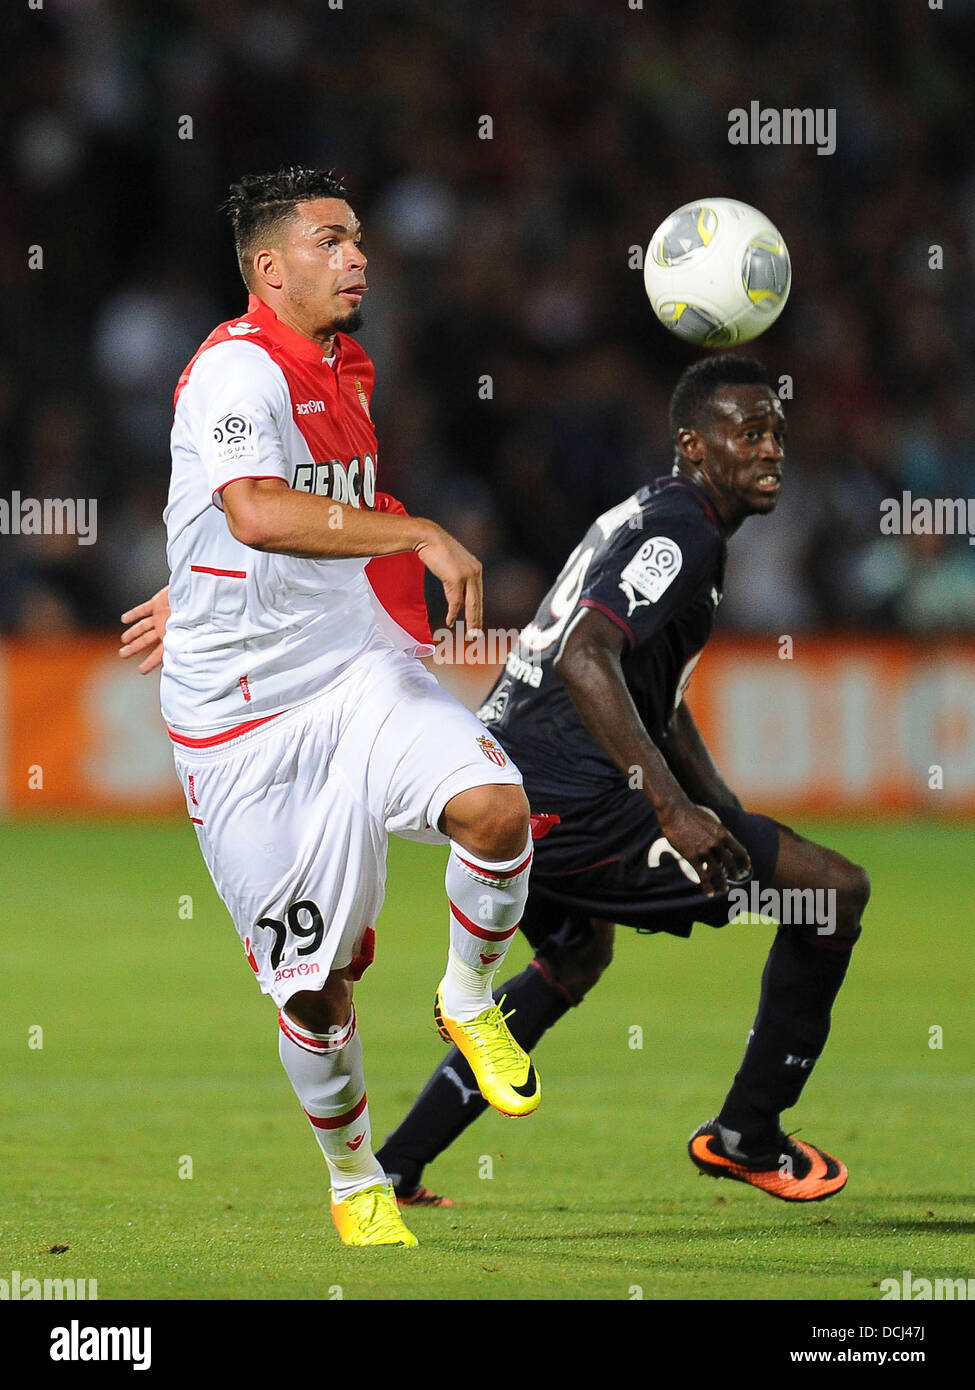 18.08.2013 Monaco. EMMANUEL RIVIERE and Maxime POUNDJE during the French Ligue 1 game between Monaco and Montpellier from the Stade Louis II stadium. Stock Photo